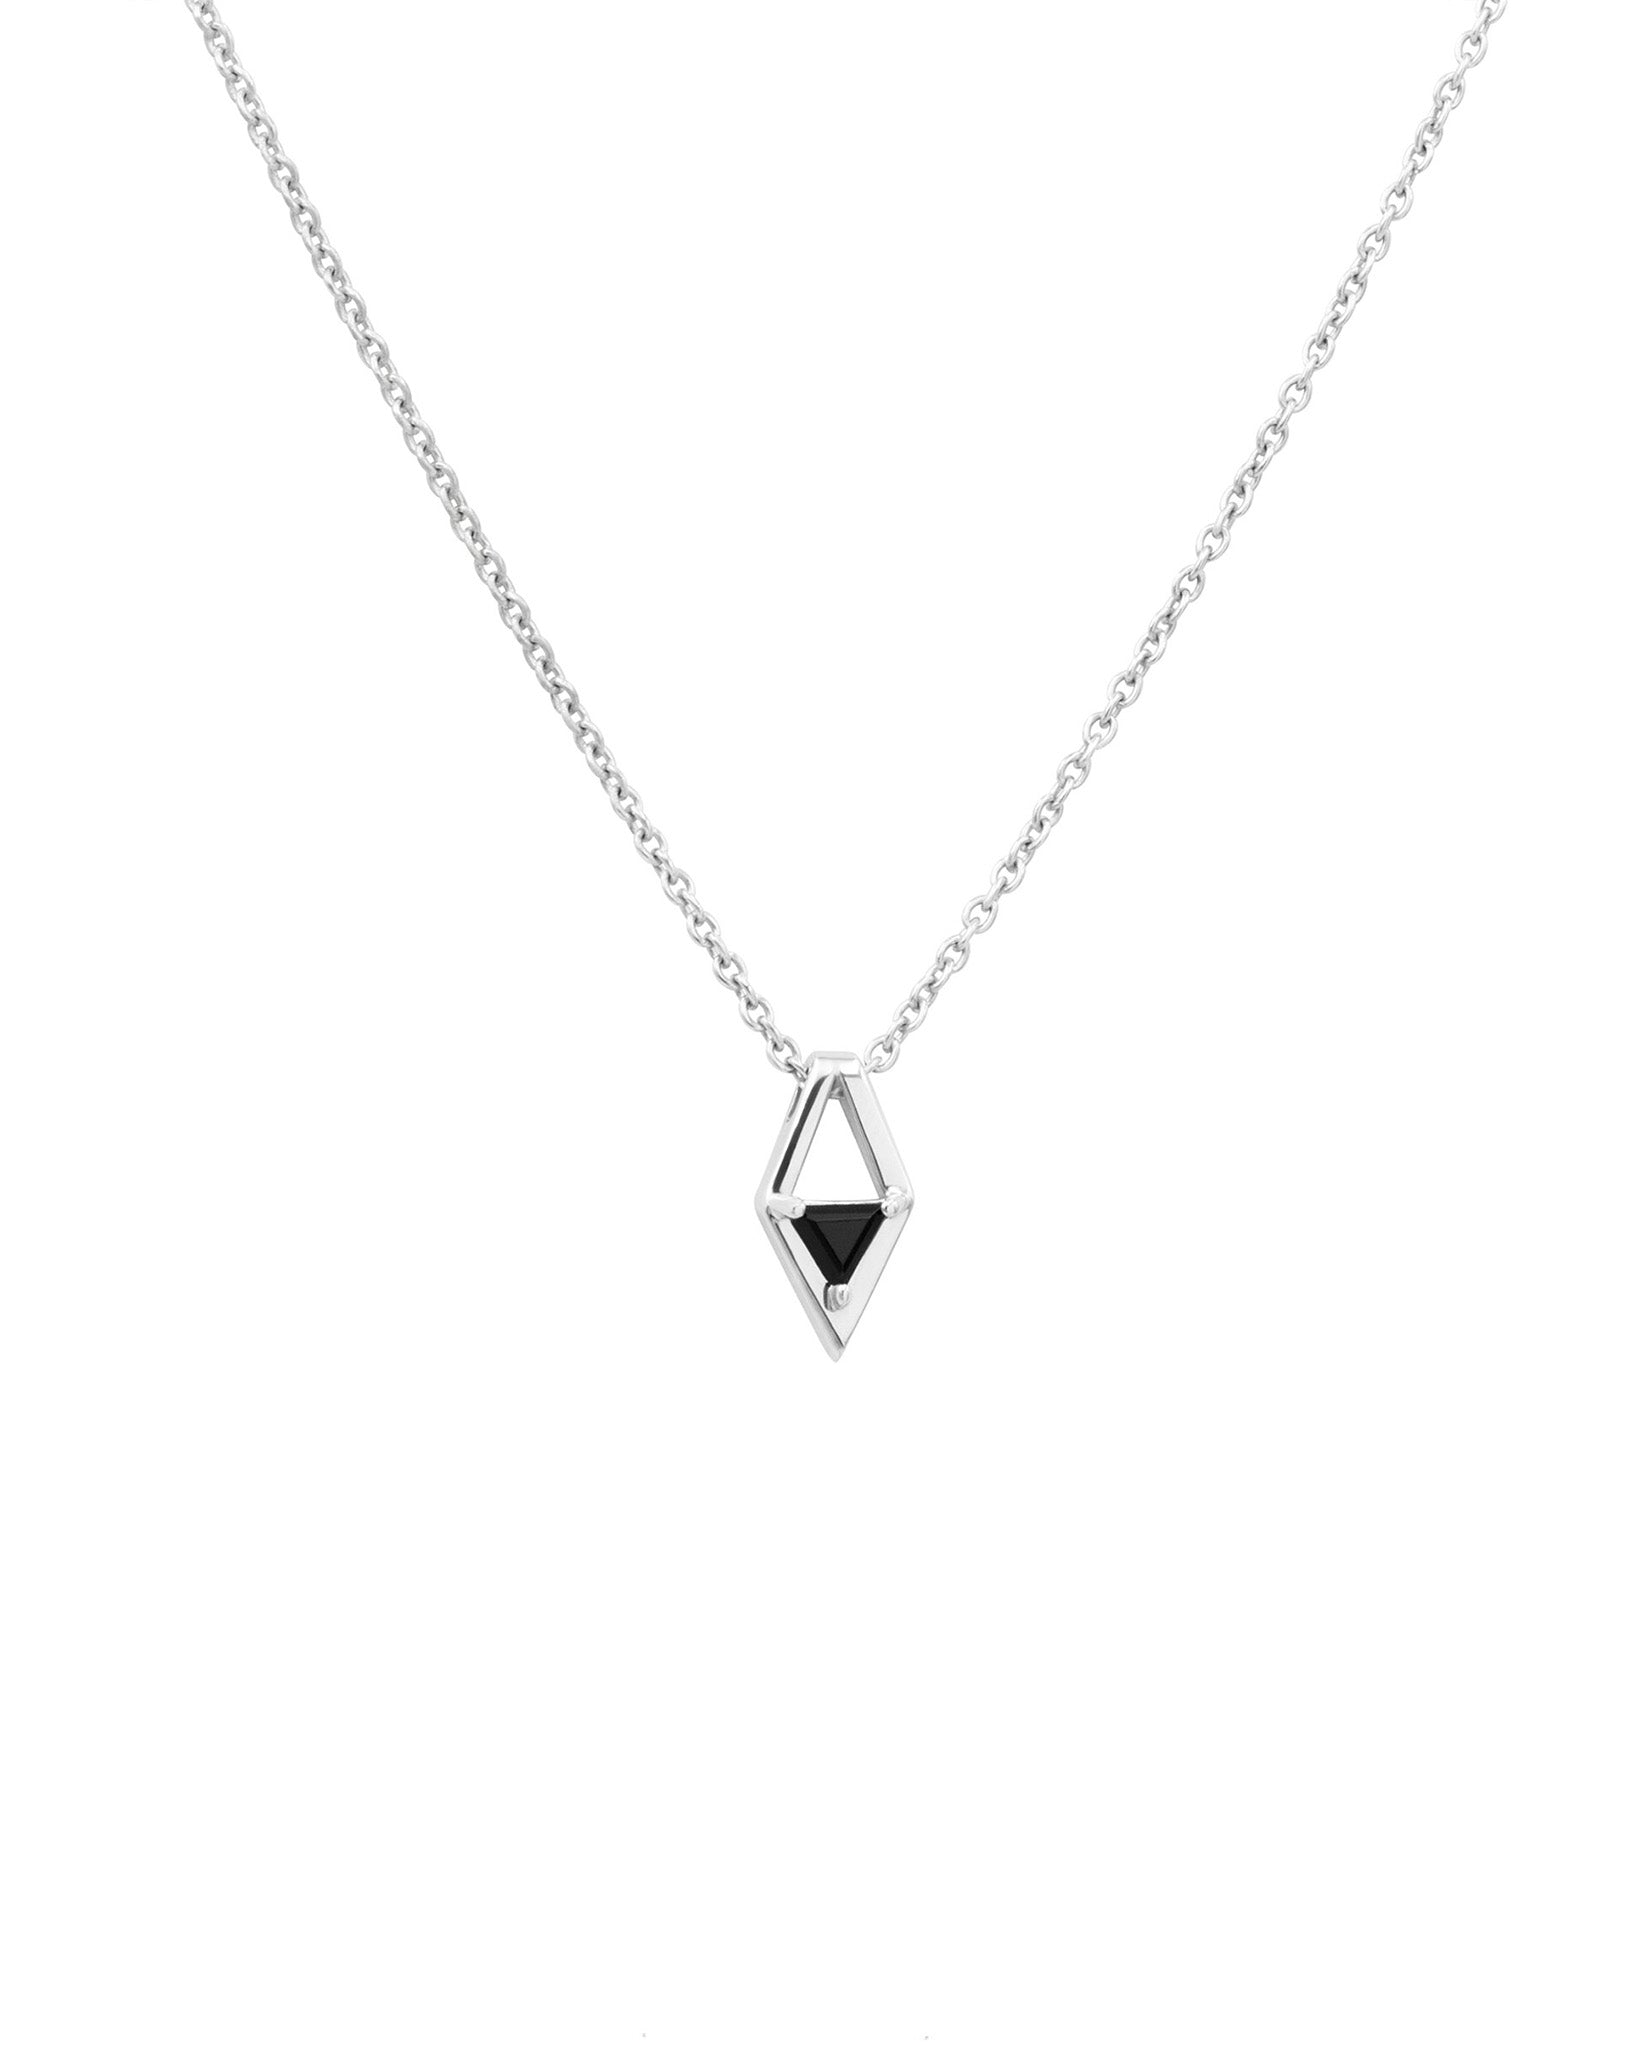 Reflection Necklace White Gold & Black Spinel